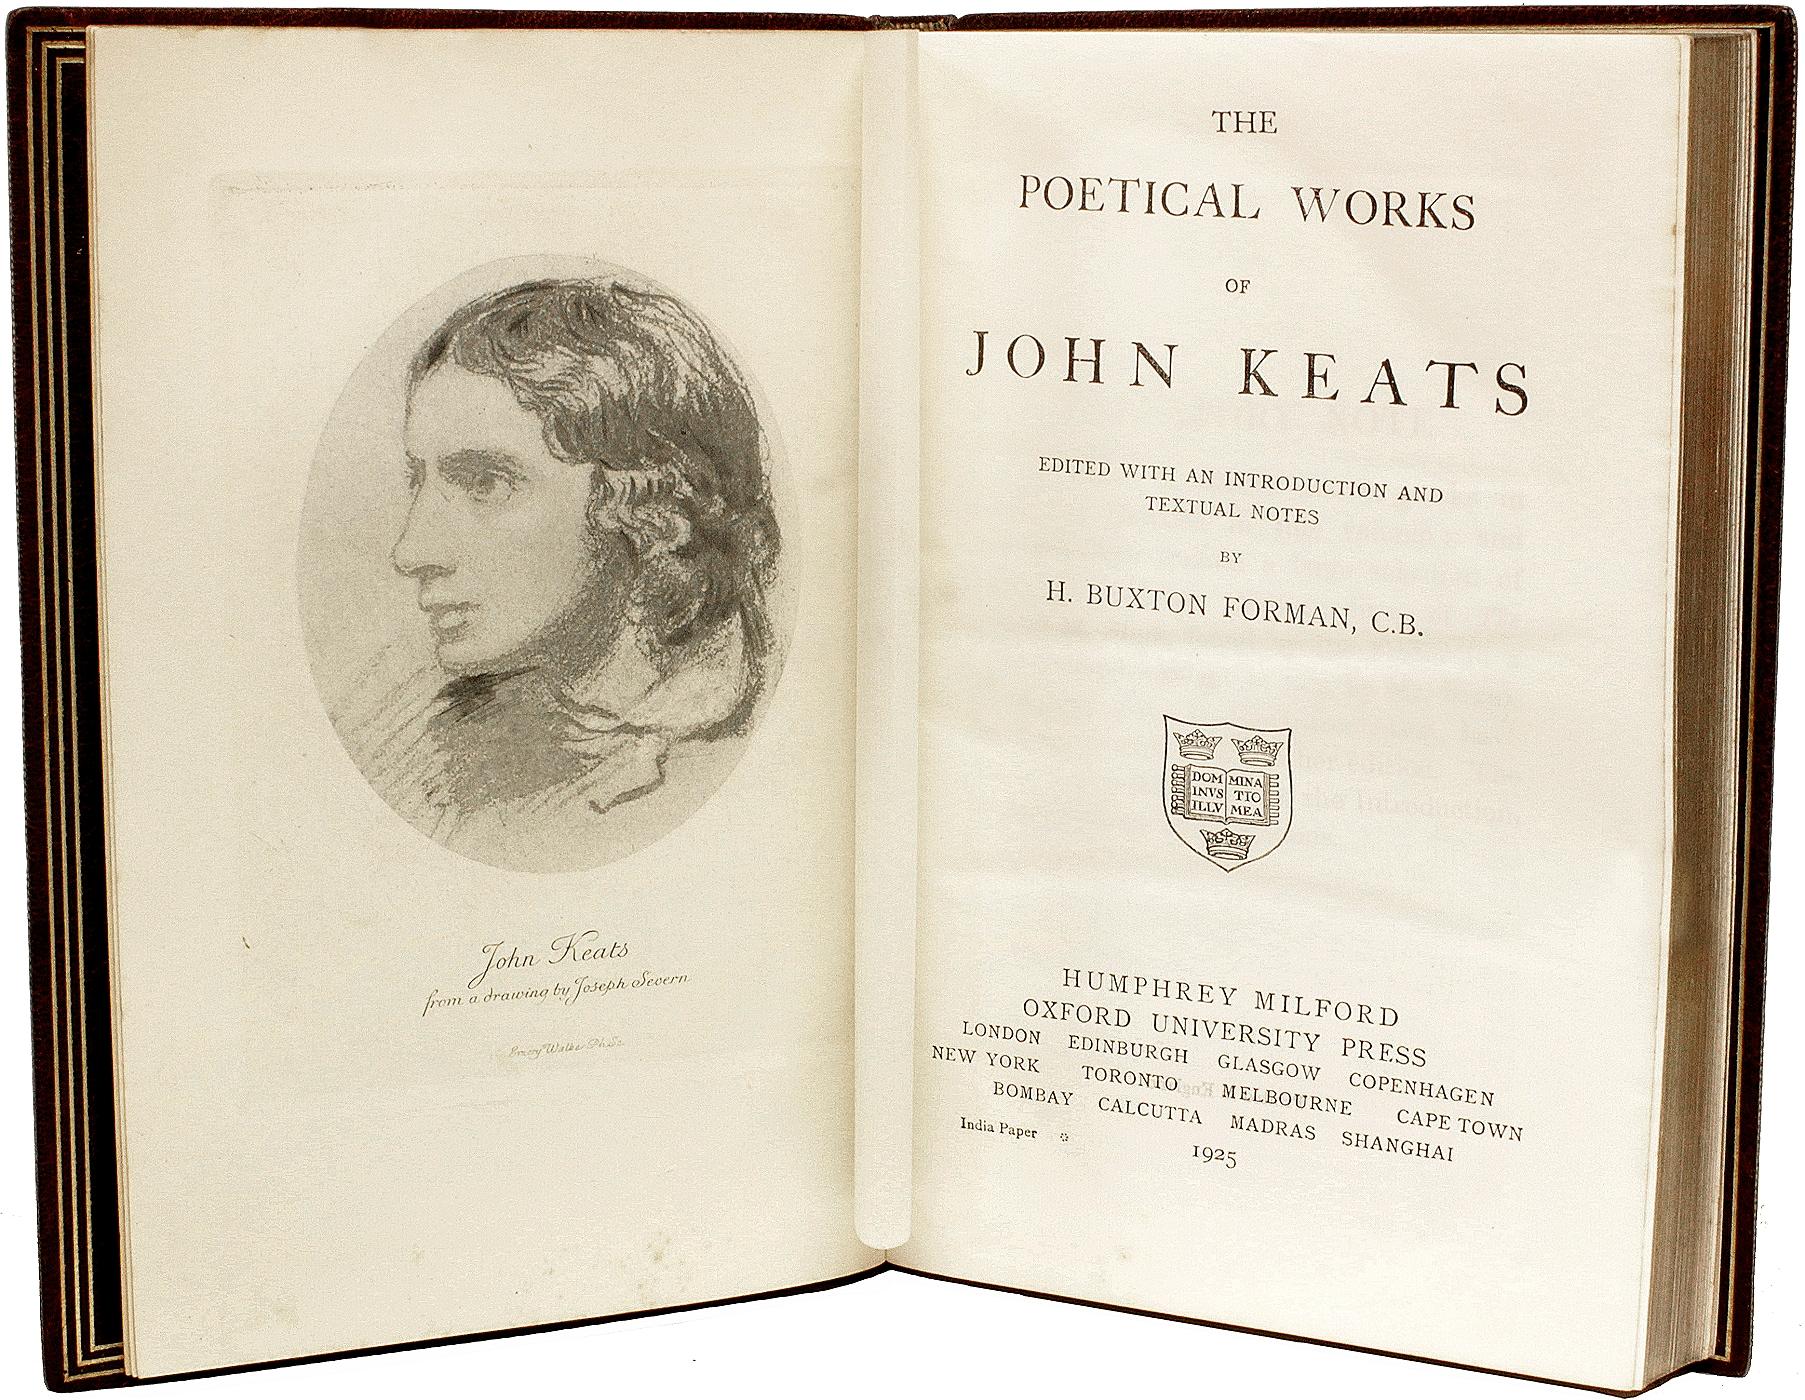 British The Complete Poetical Works of John Keats - 1925 - IN A FINE FULL BINDING!